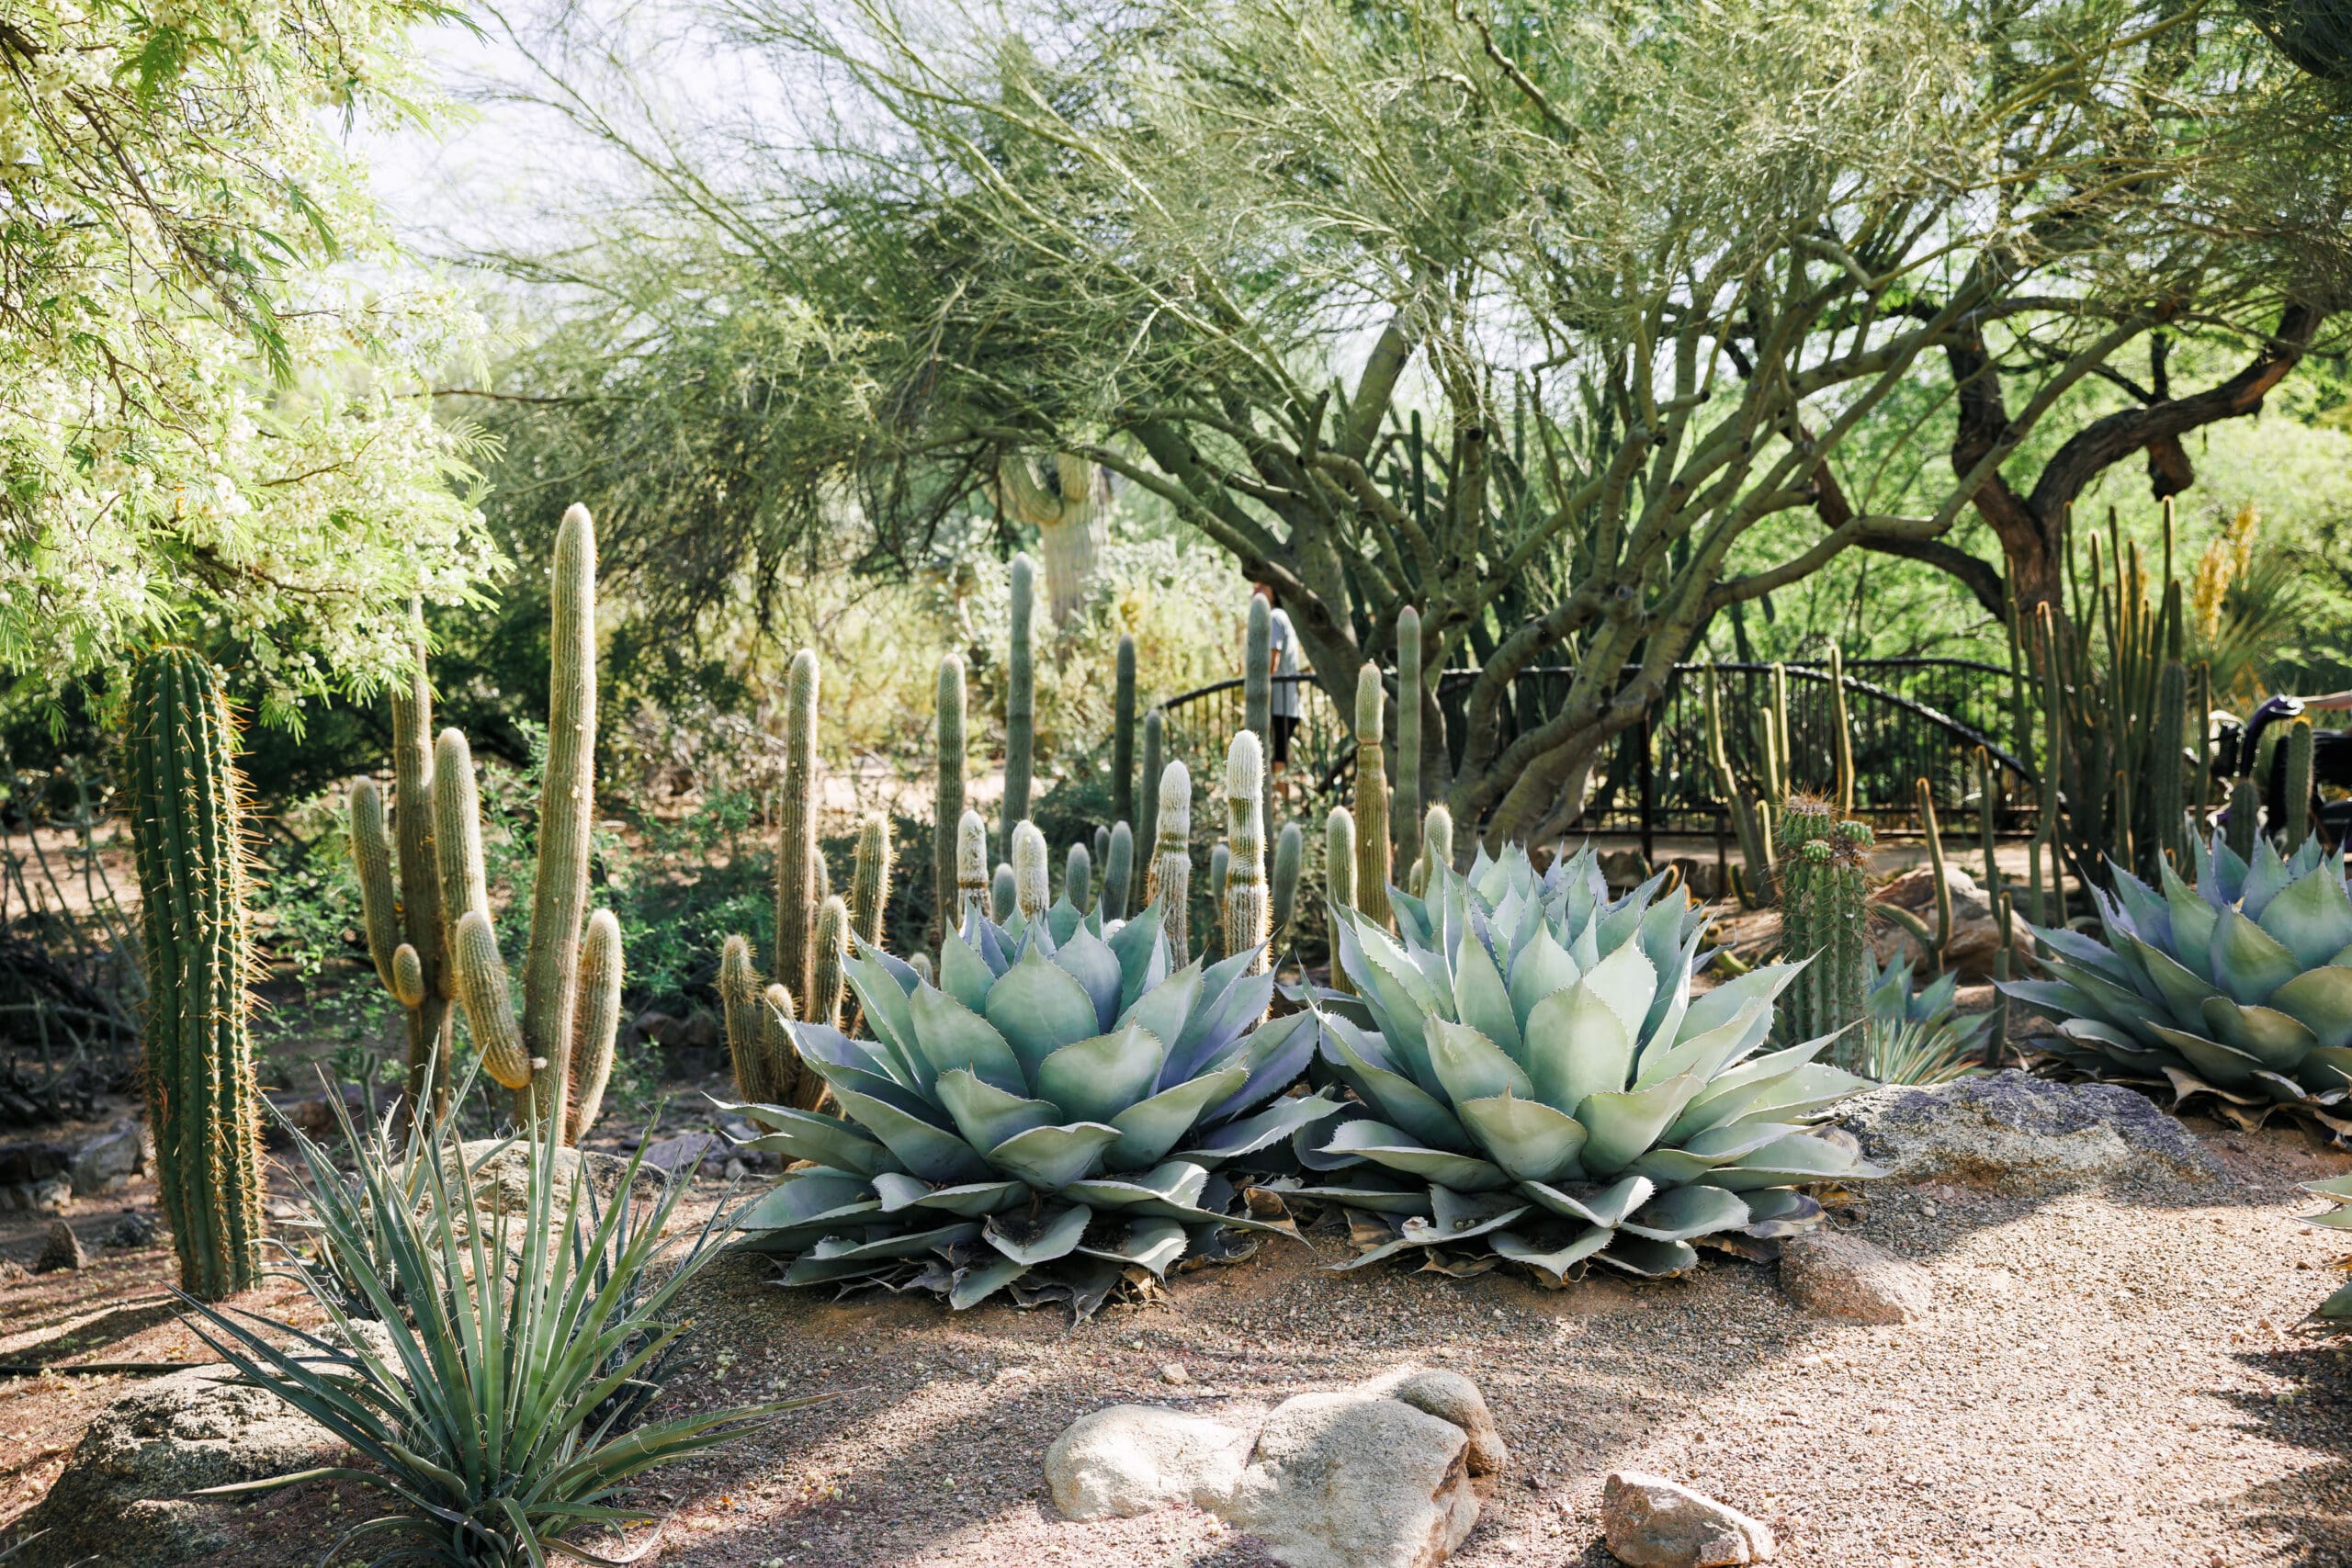 Planting with purpose in the Arizona landscape